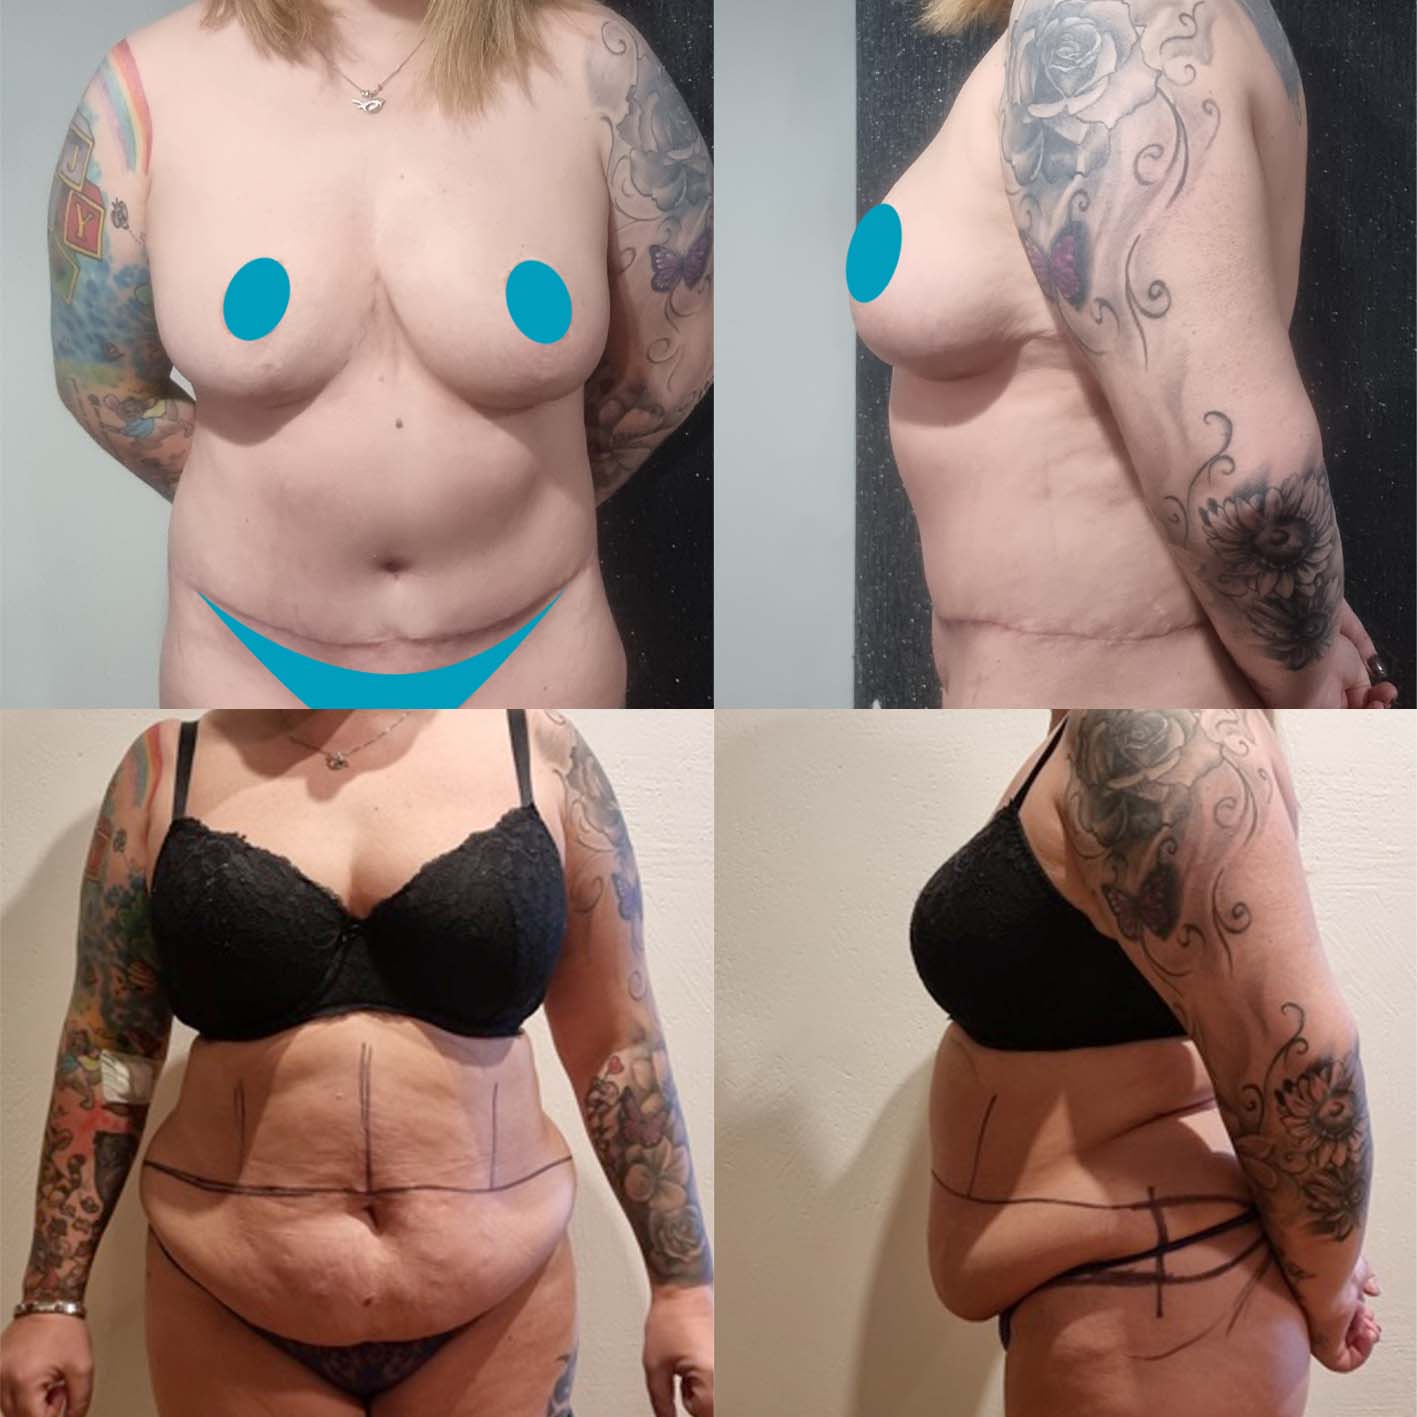 Tummy tuck before & after photos - Nordesthetics Clinic